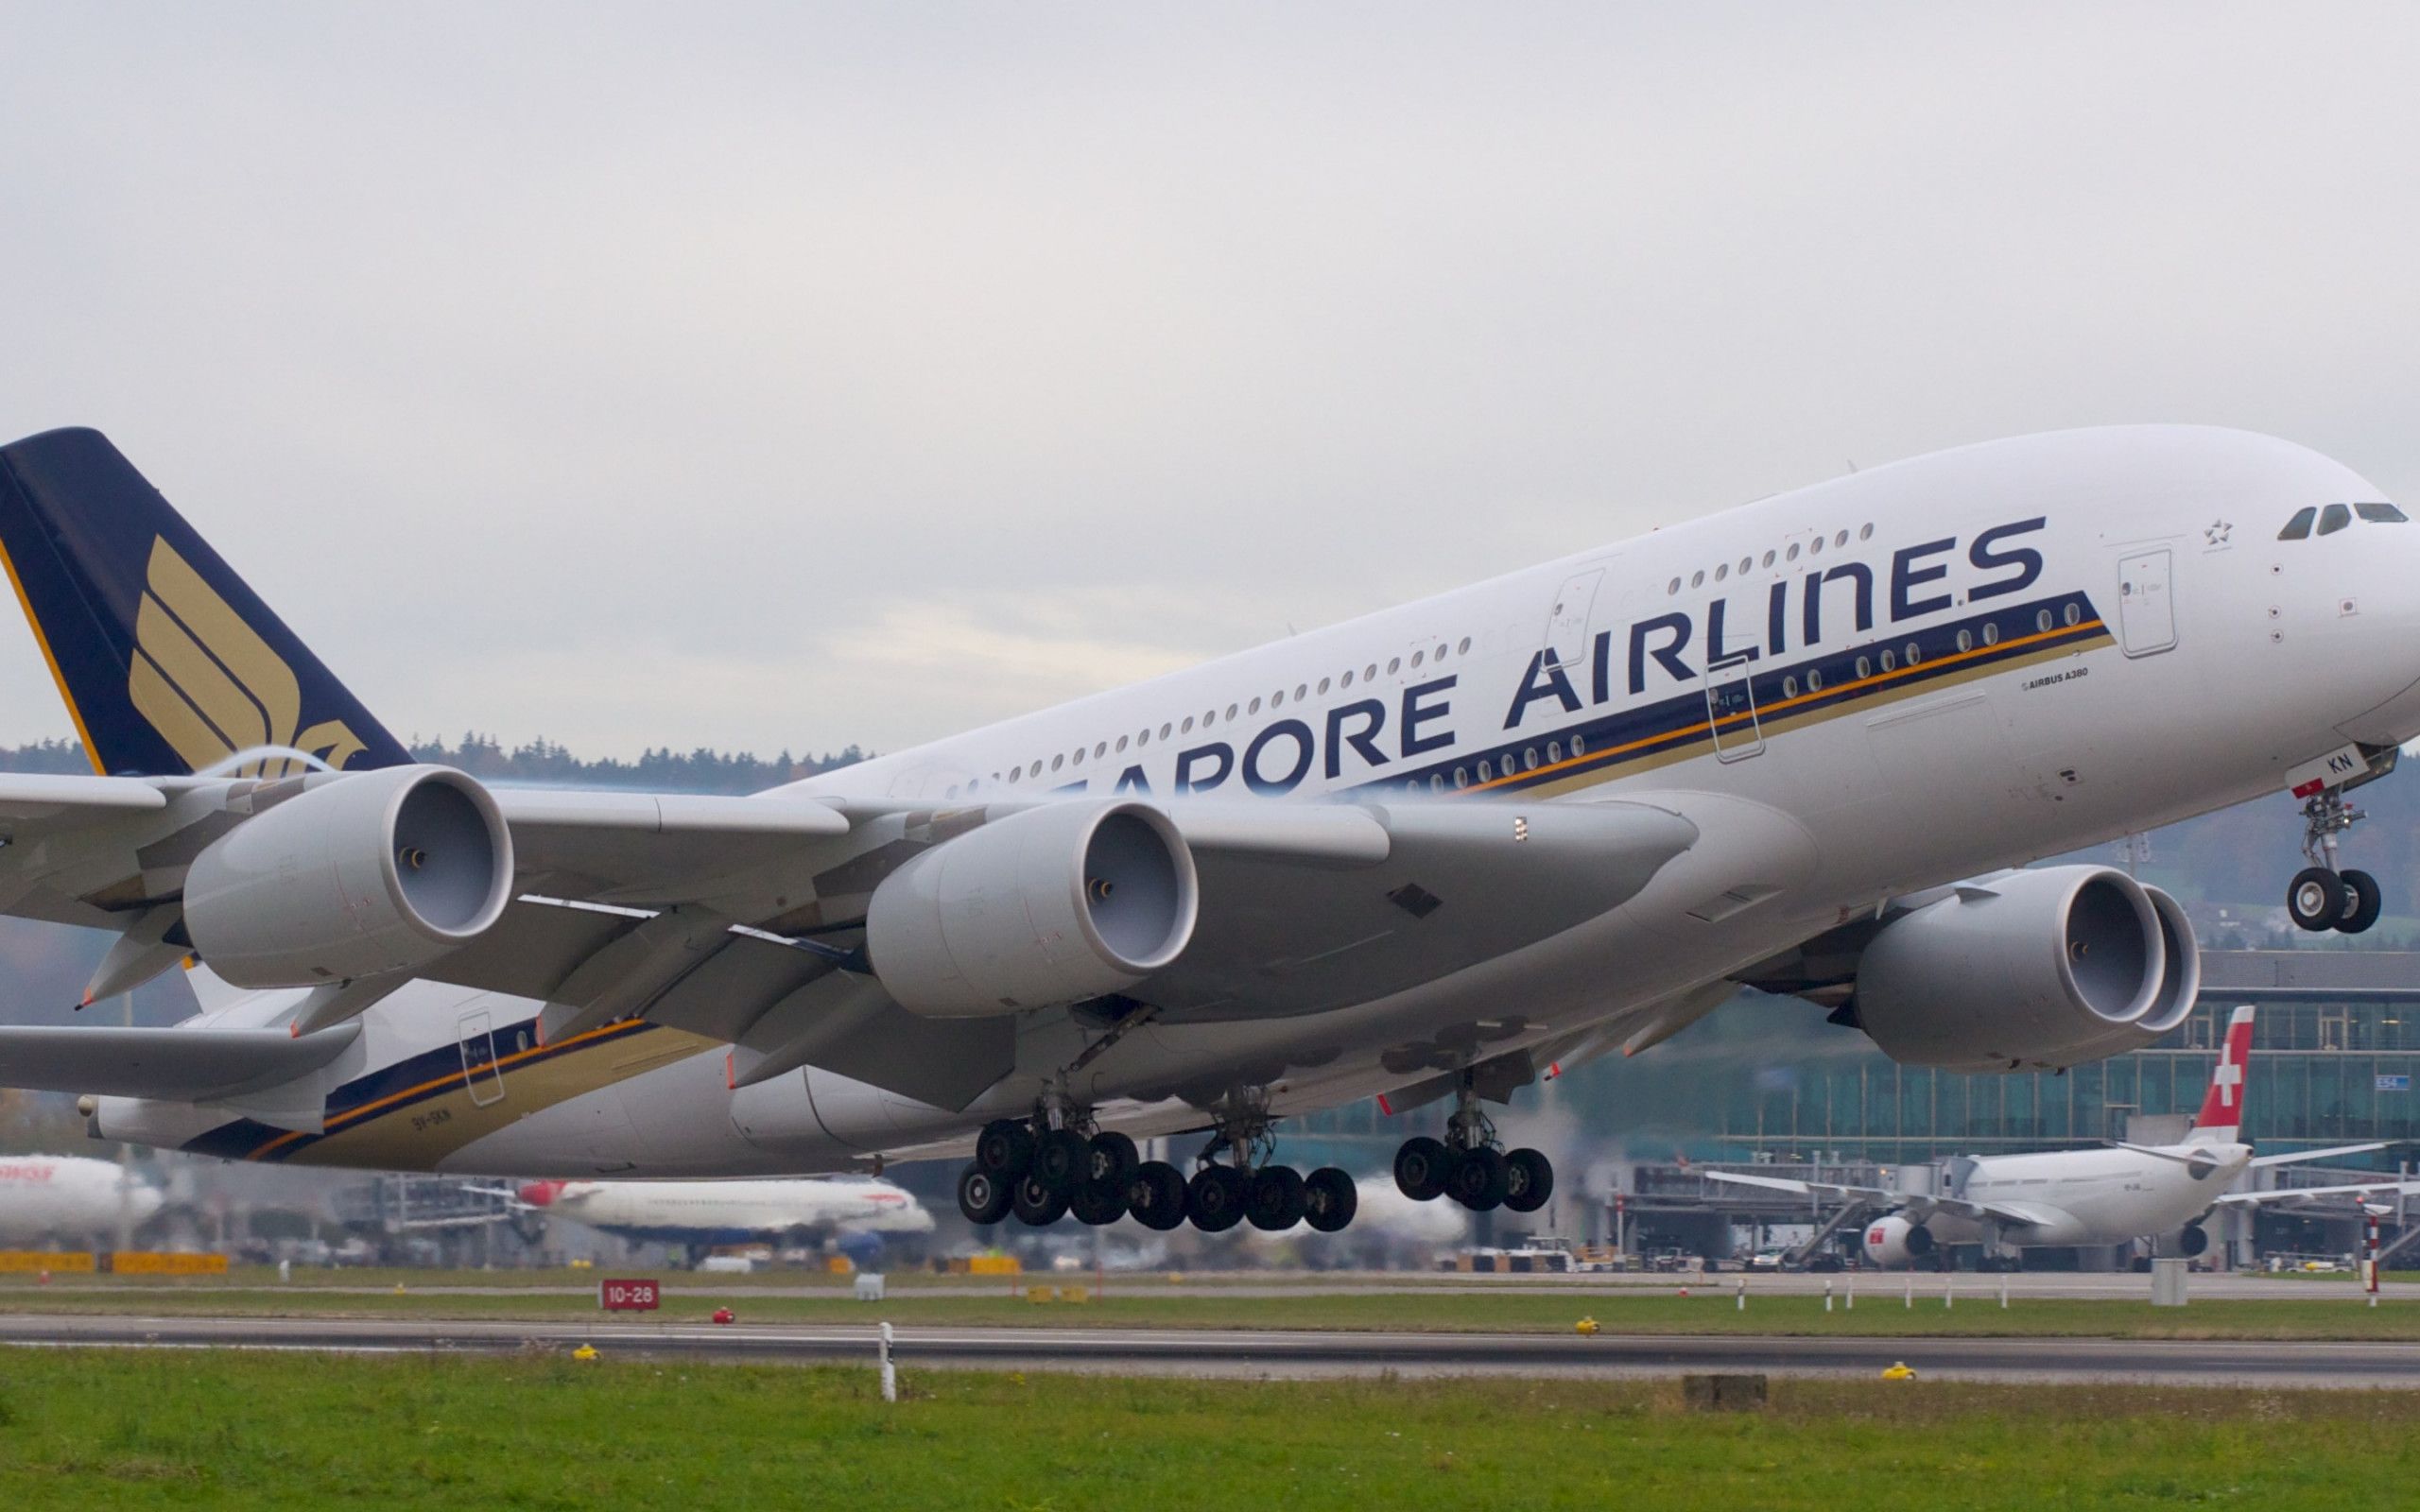 Download wallpaper: Passenger airplane from Singapore airlines 2560x1600